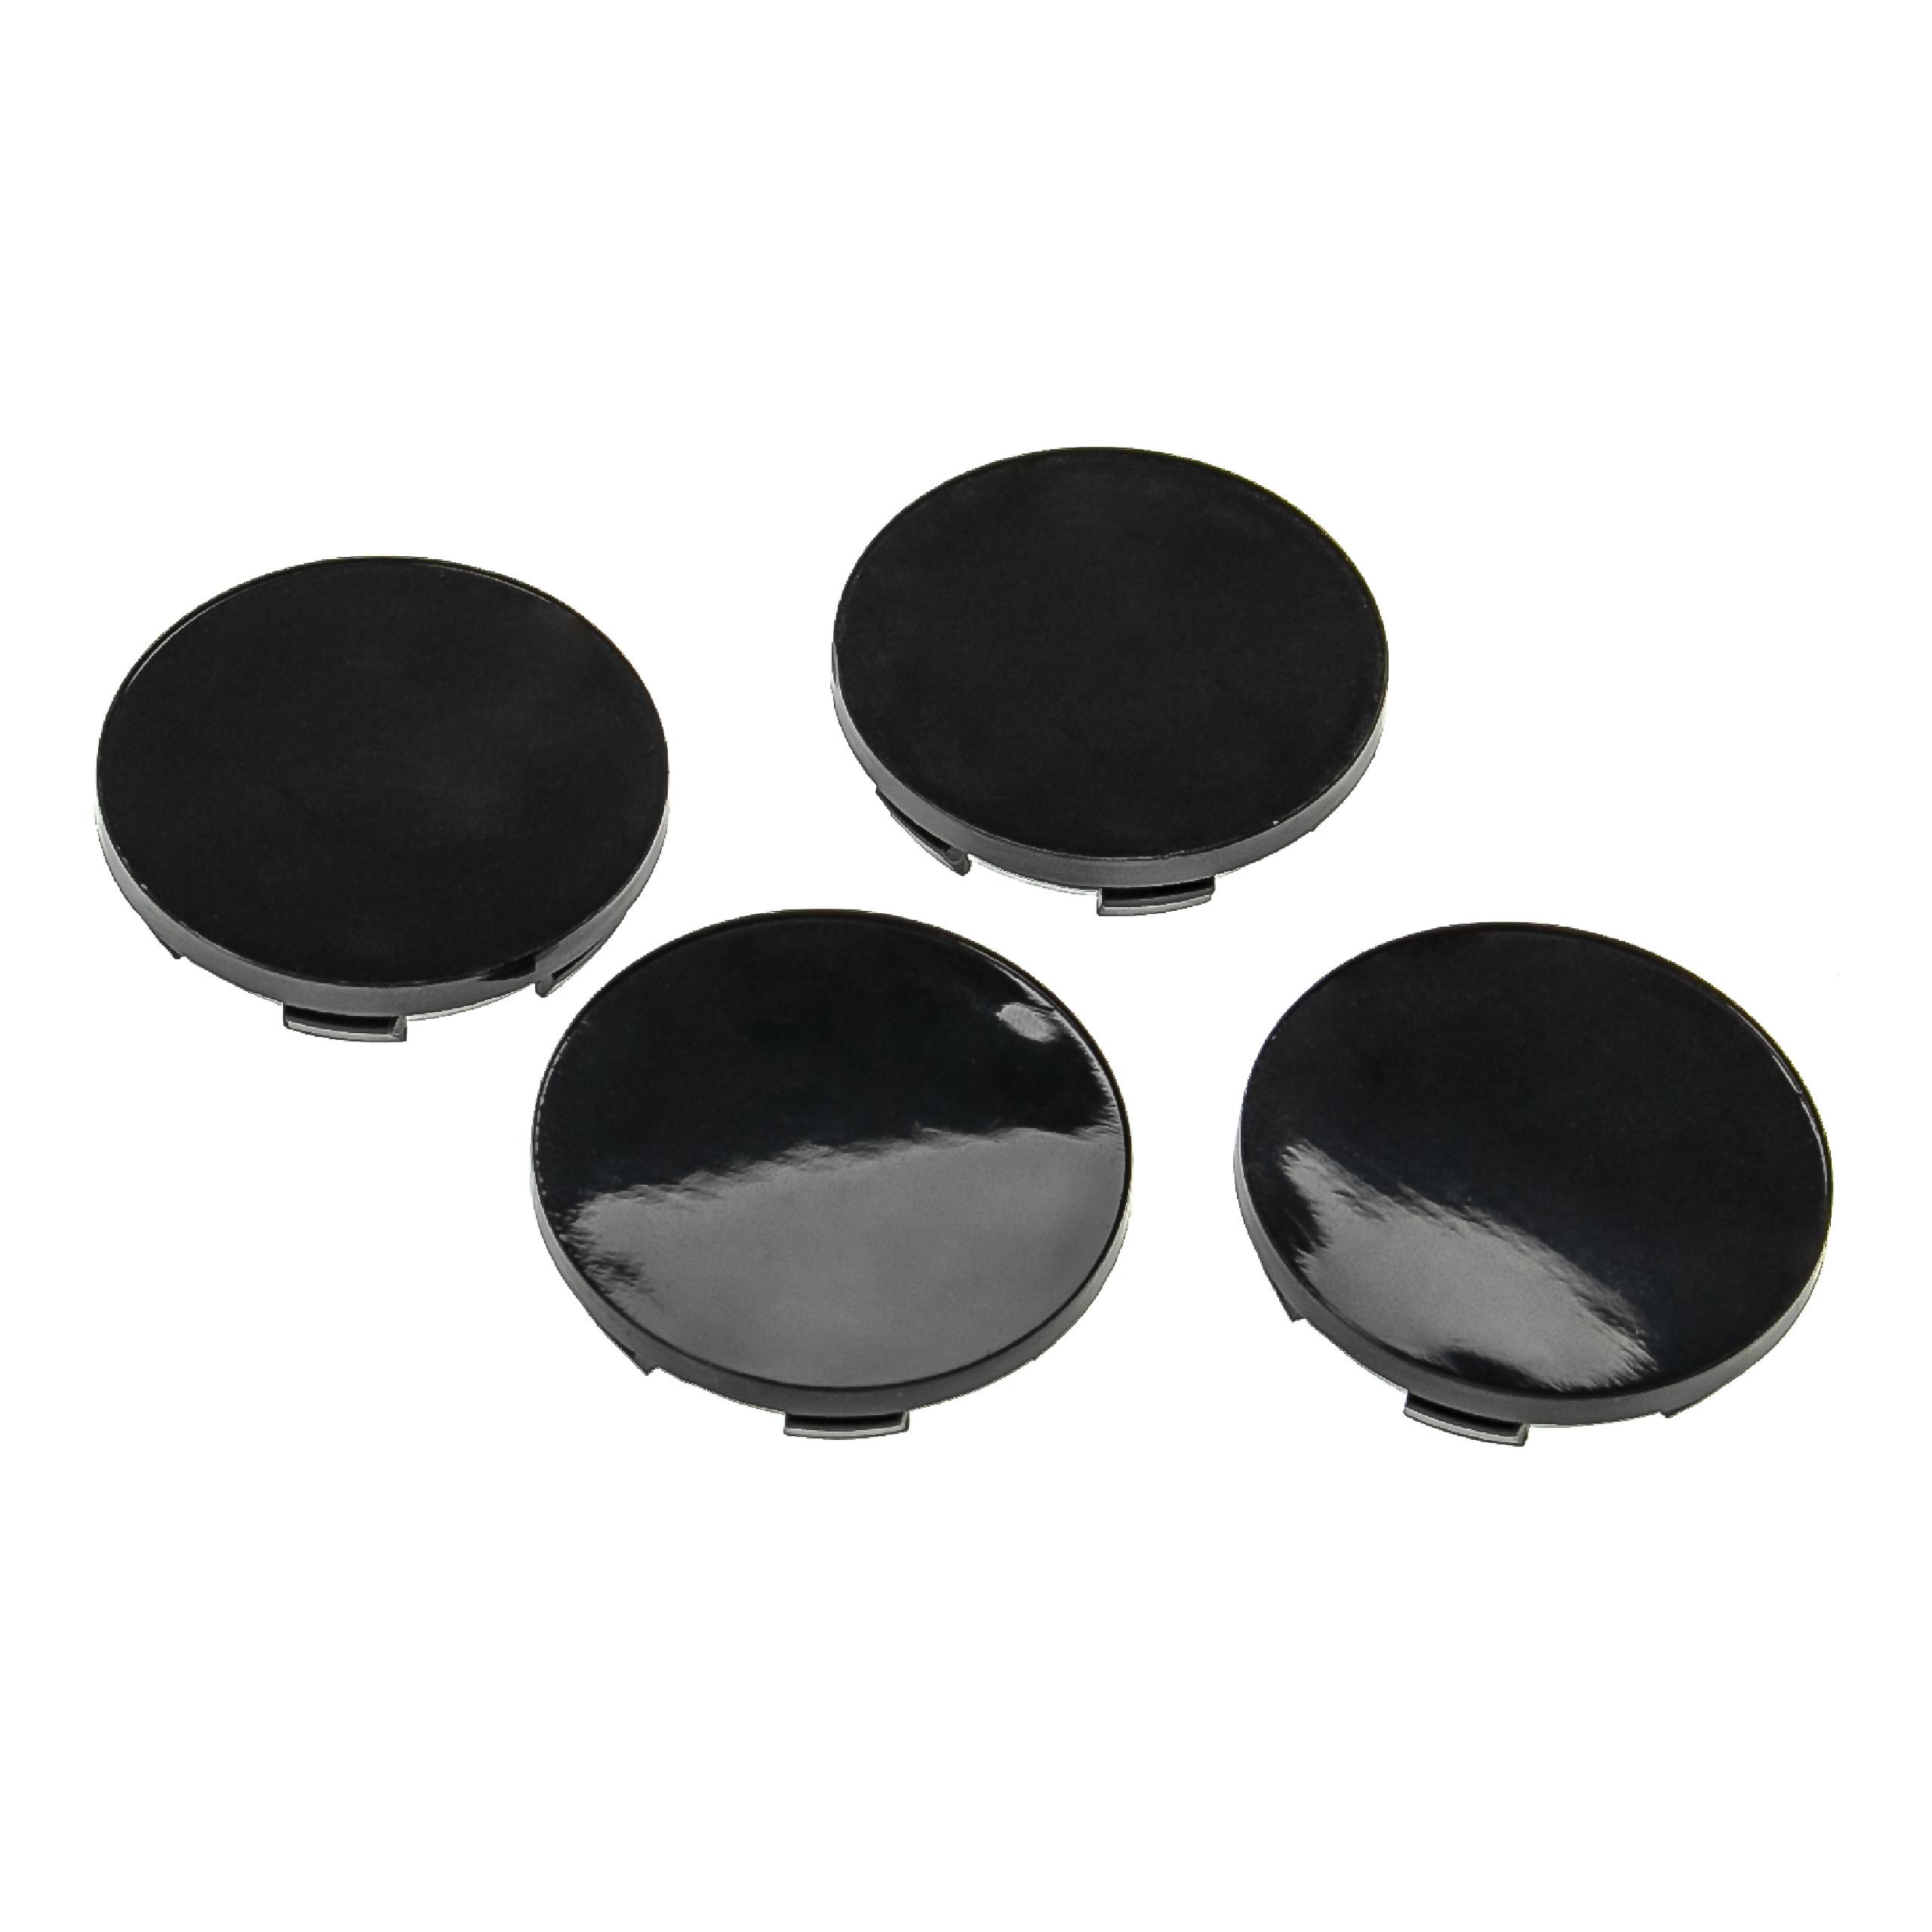 vhbw 4x Hubcaps Replacement for C-70103 for for Cars, Passenger Cars - Car Hubcaps, 51 mm Black, Plastic